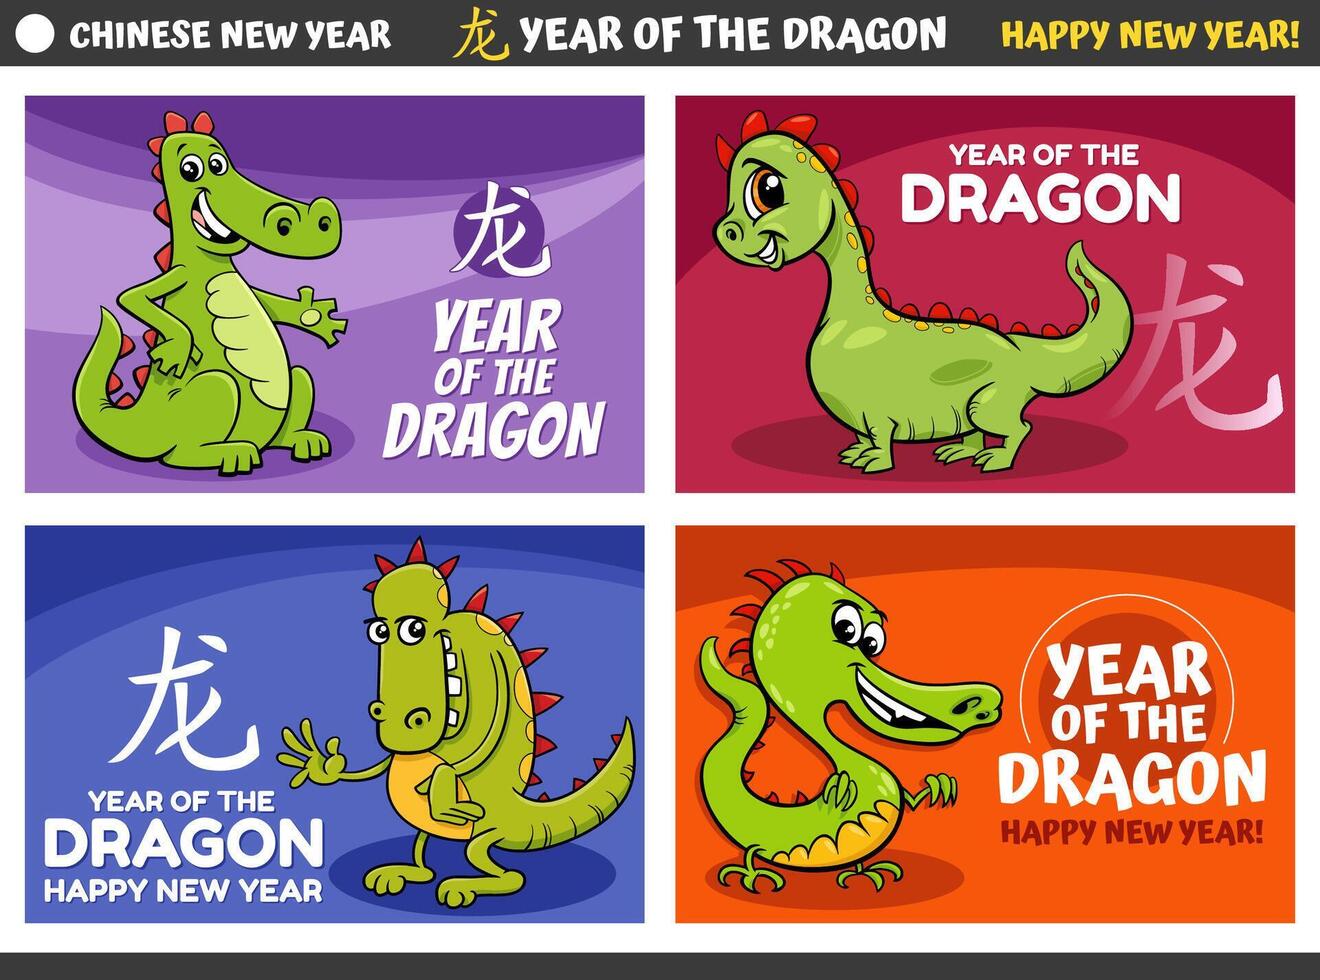 Chinese New Year designs set with cartoon dragon characters vector